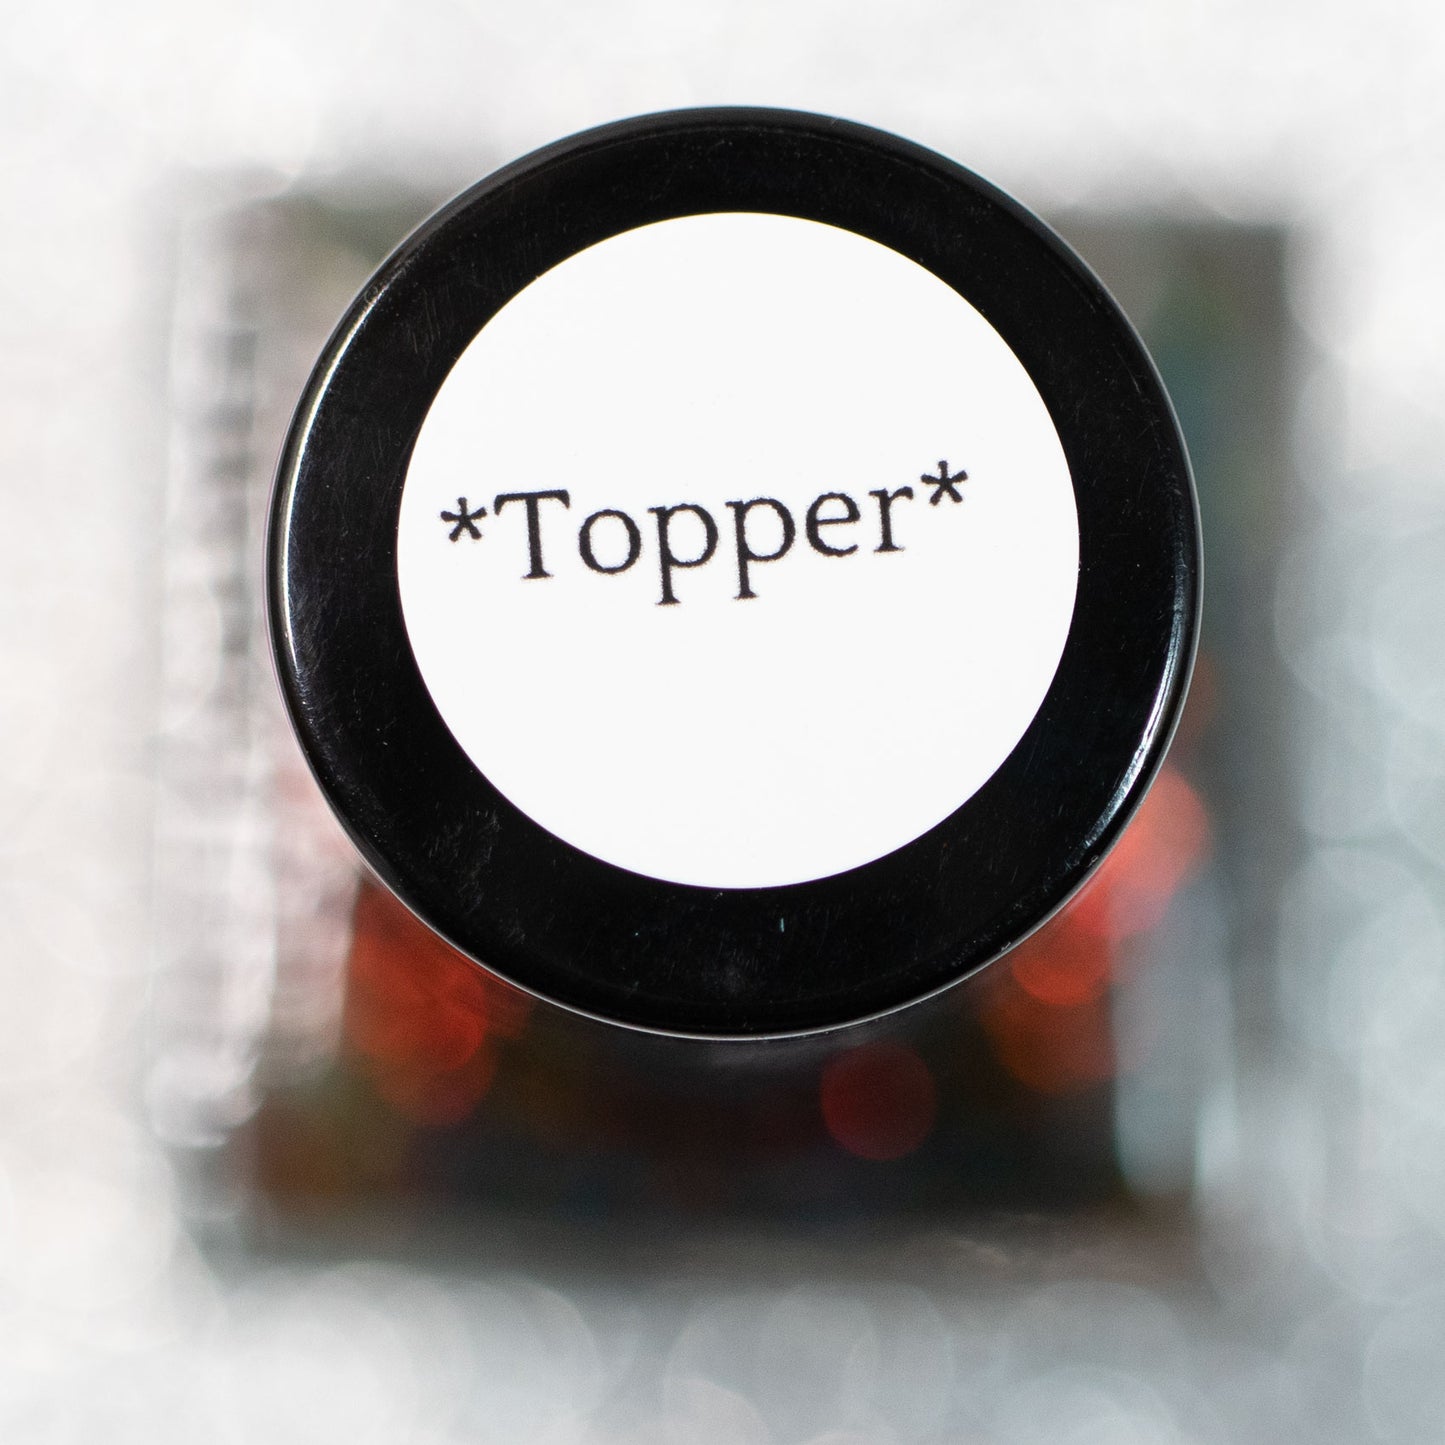 I'll Take Thee Away 2.0 - *TOPPER*